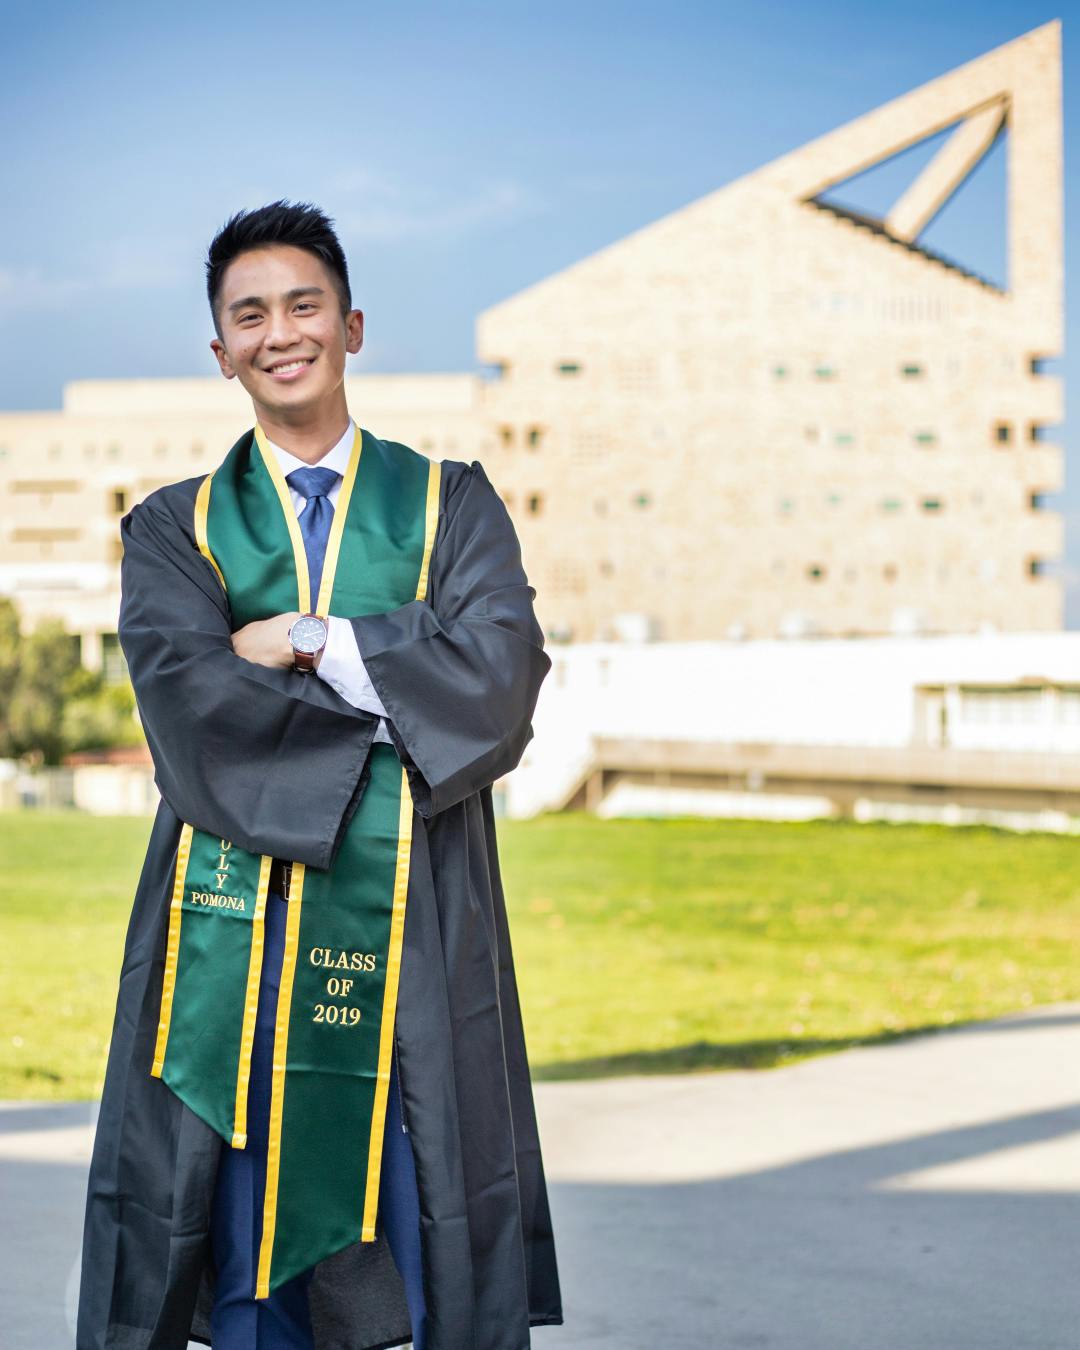 Man standing in graduation gown next to building.